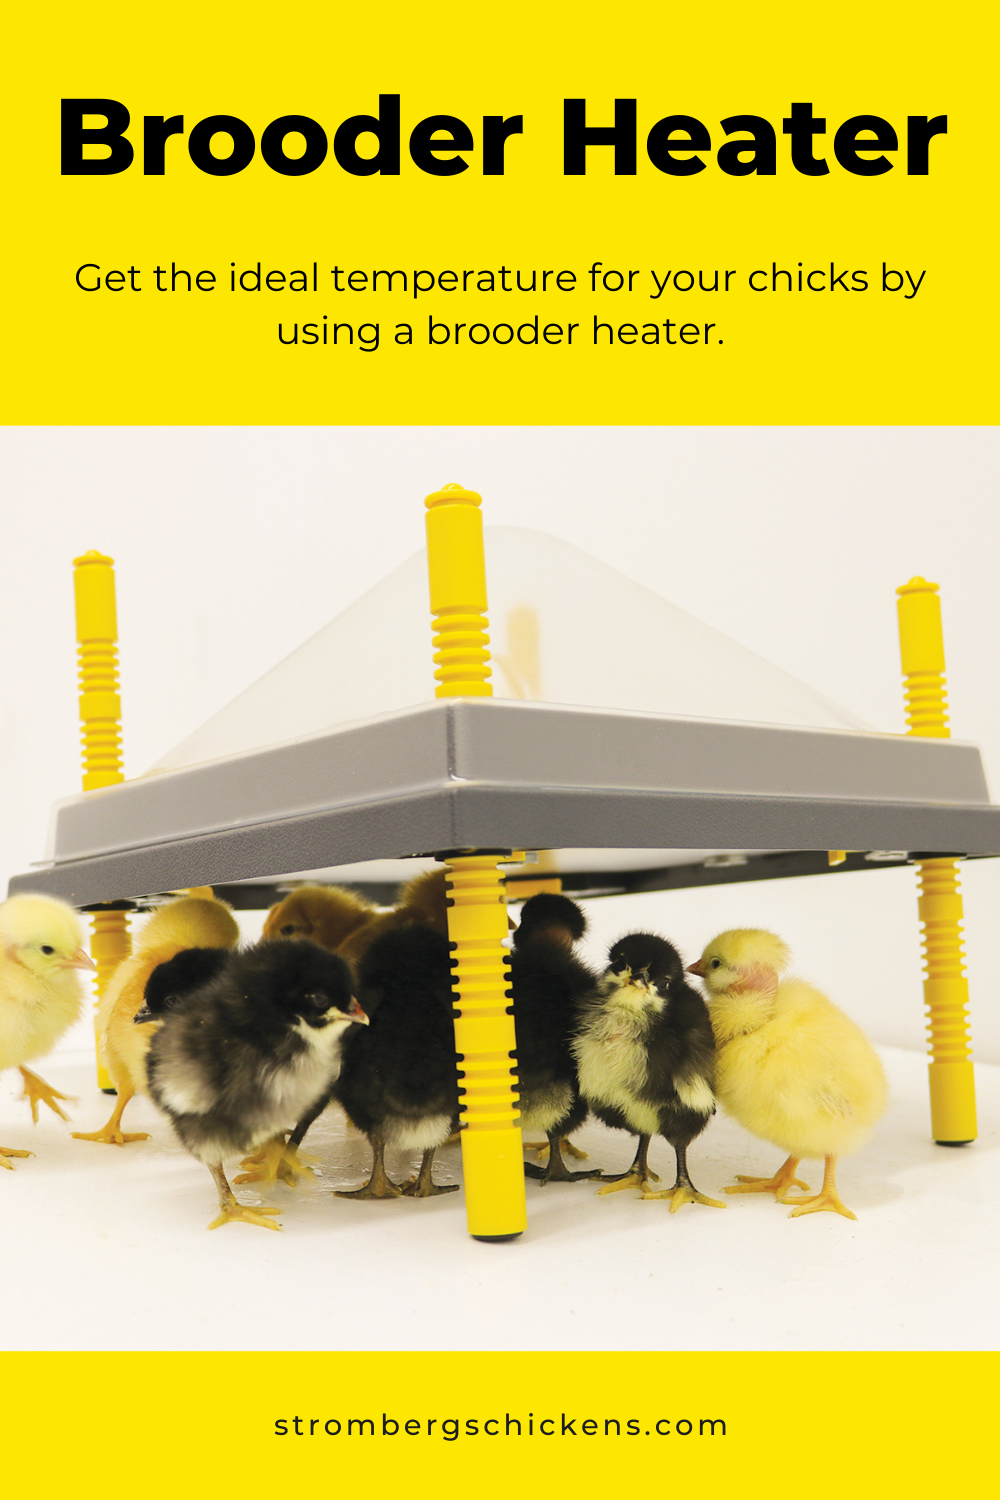 brooder heater for ideal temperature for your chicks